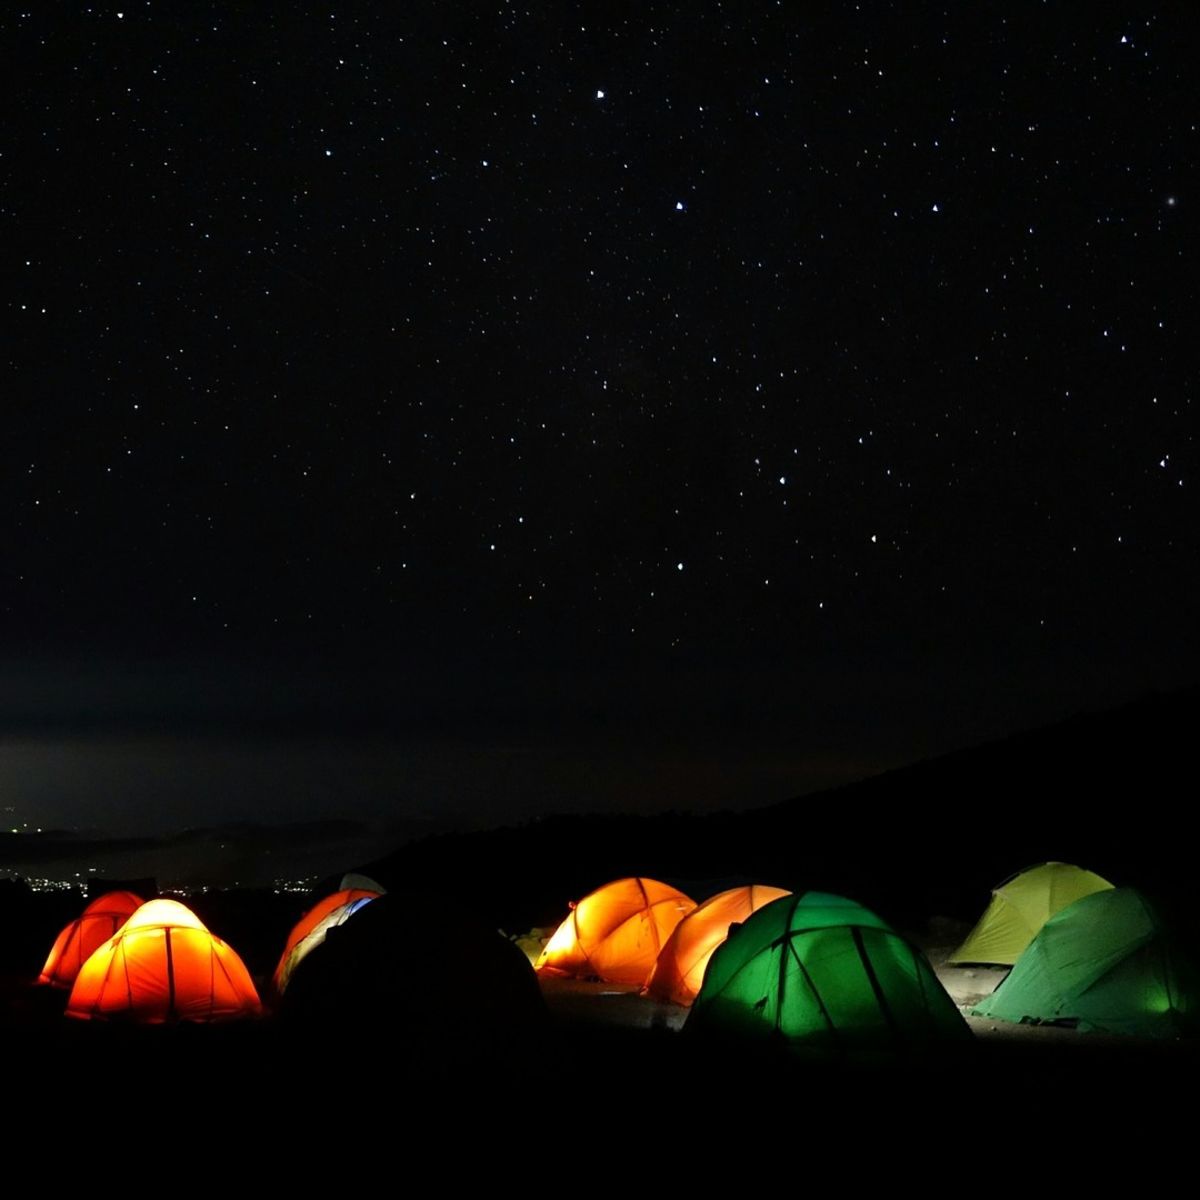 Starry sky over Kilimanjaro campsite with orange and green dome tents lit up from within